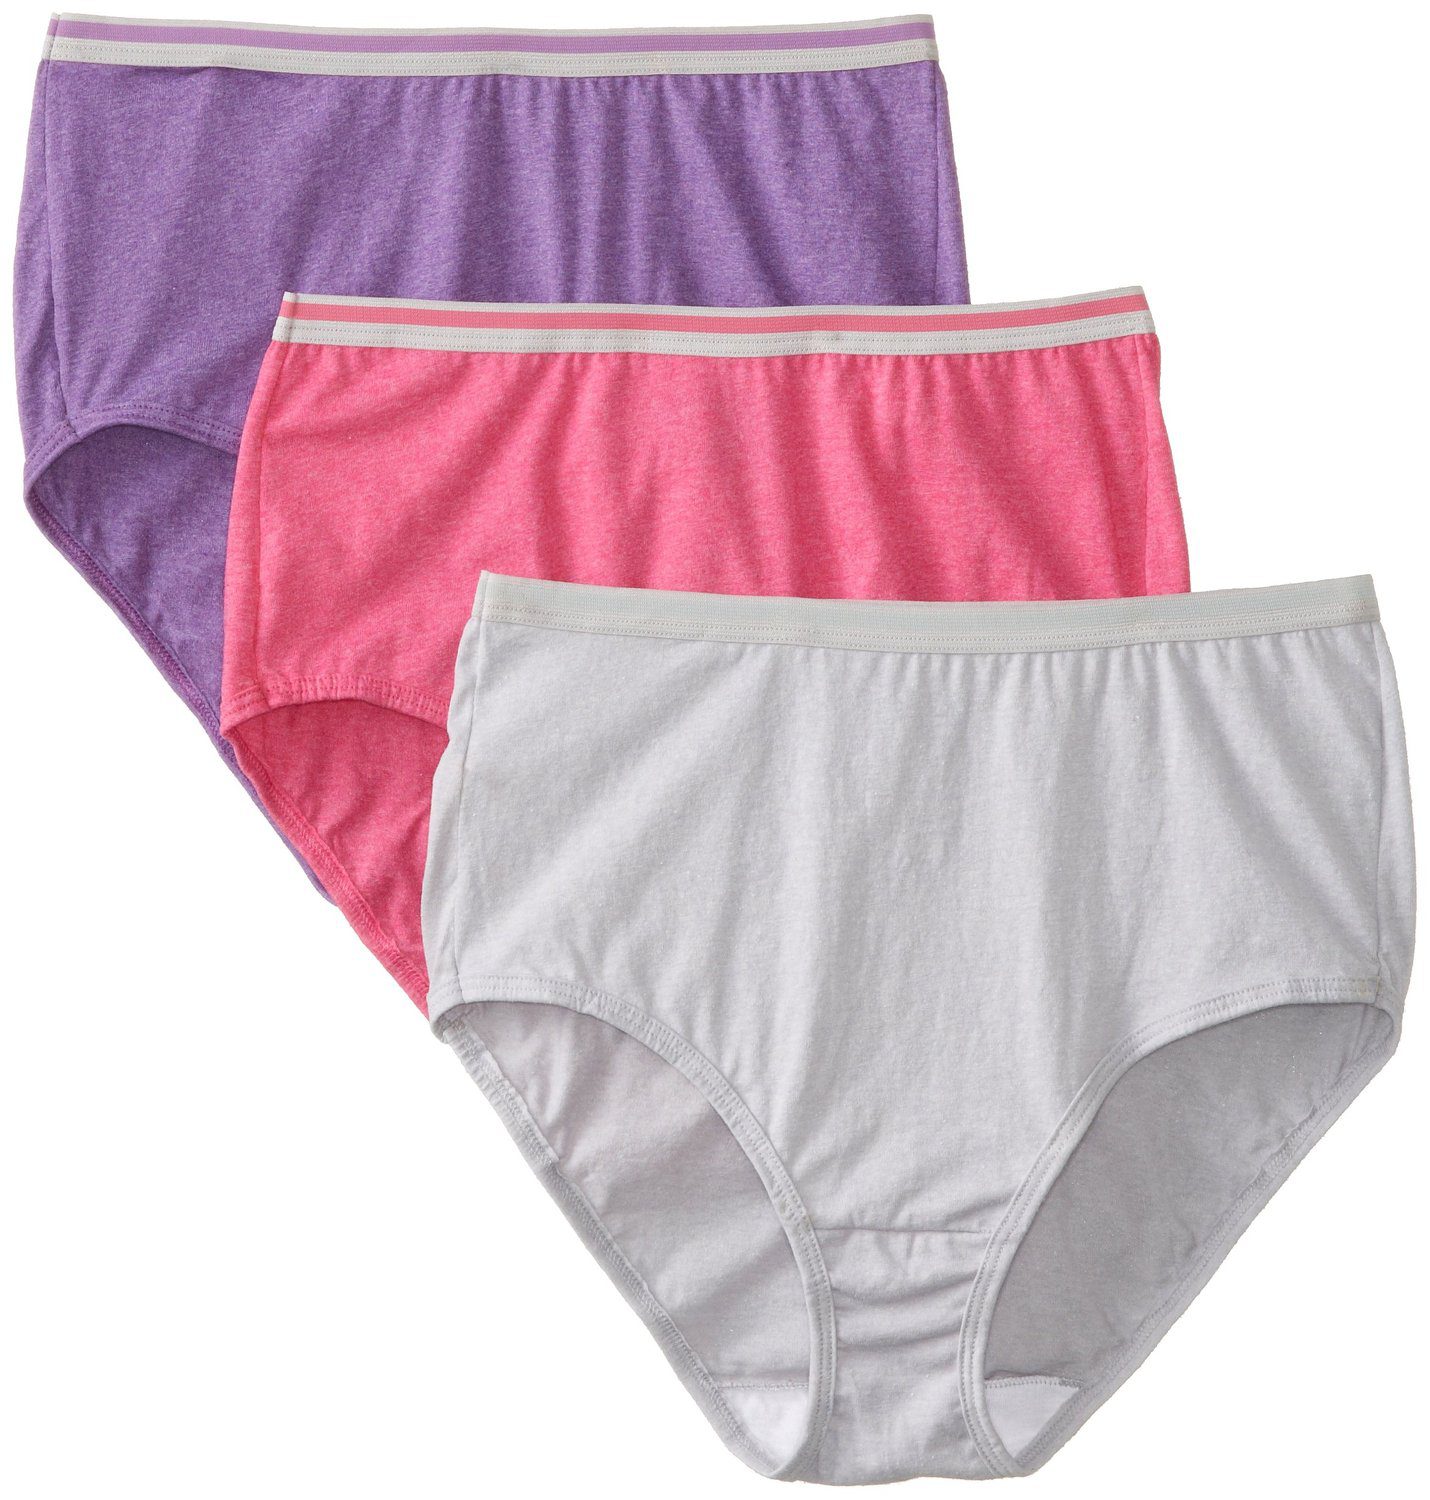 Women's Heather Brief Panty, Assorted 3 Pack